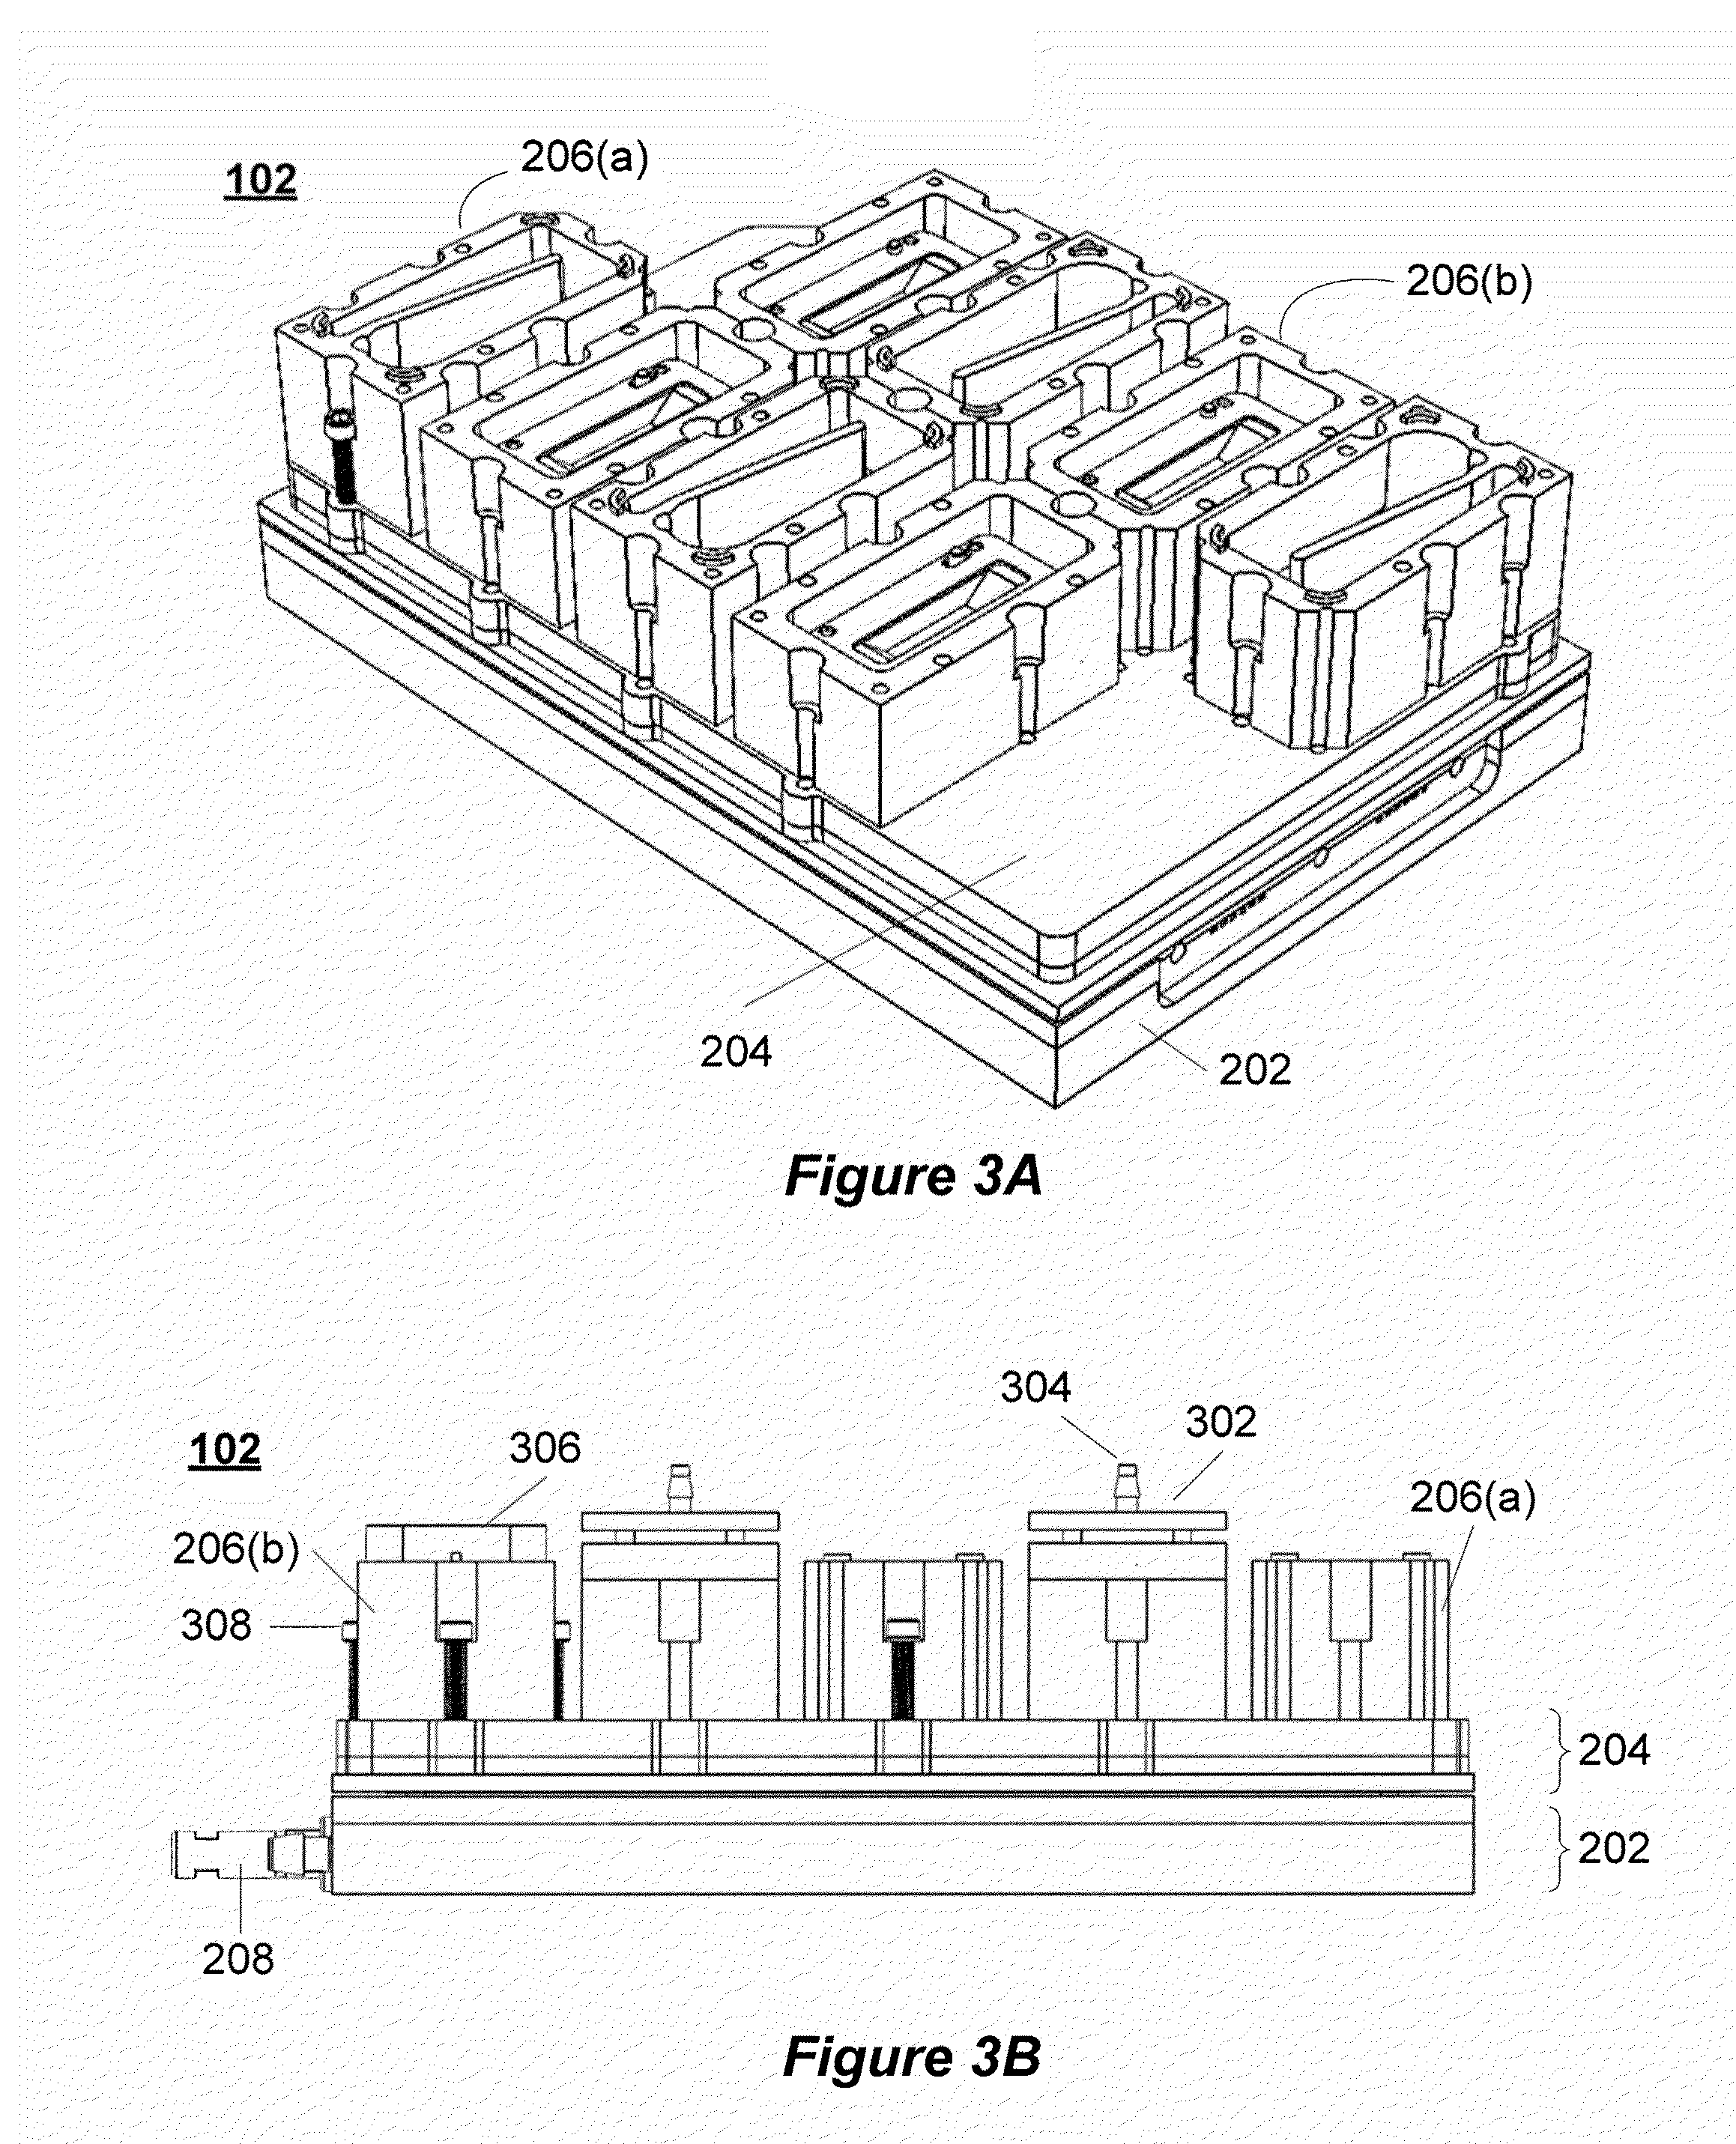 Modular platform for multi-tissue integrated cell culture